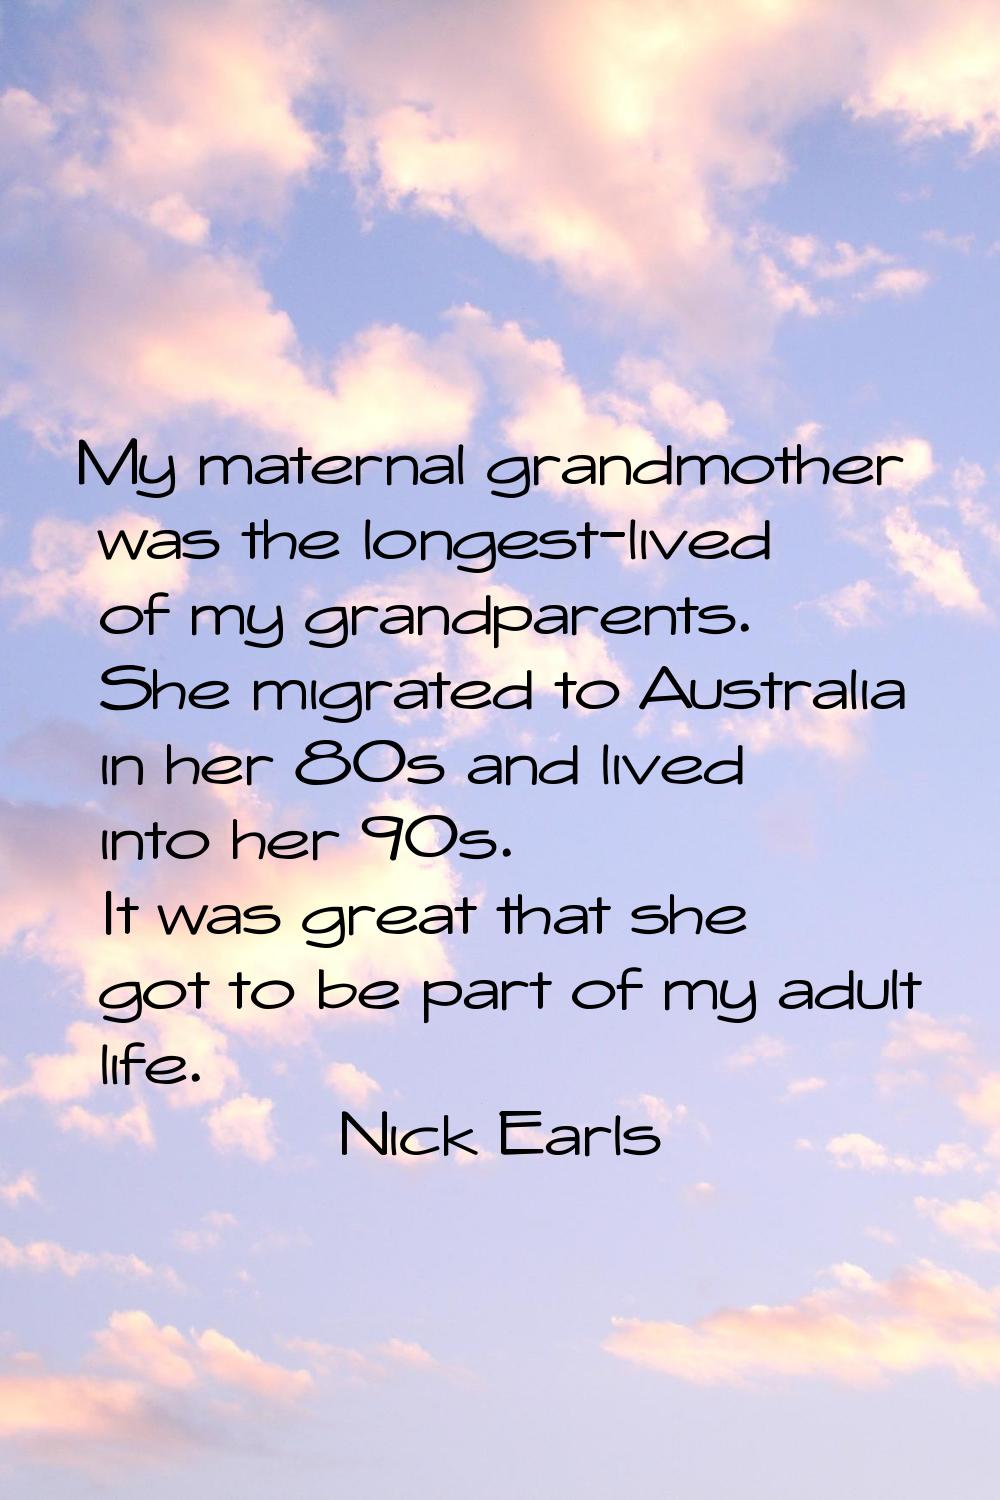 My maternal grandmother was the longest-lived of my grandparents. She migrated to Australia in her 